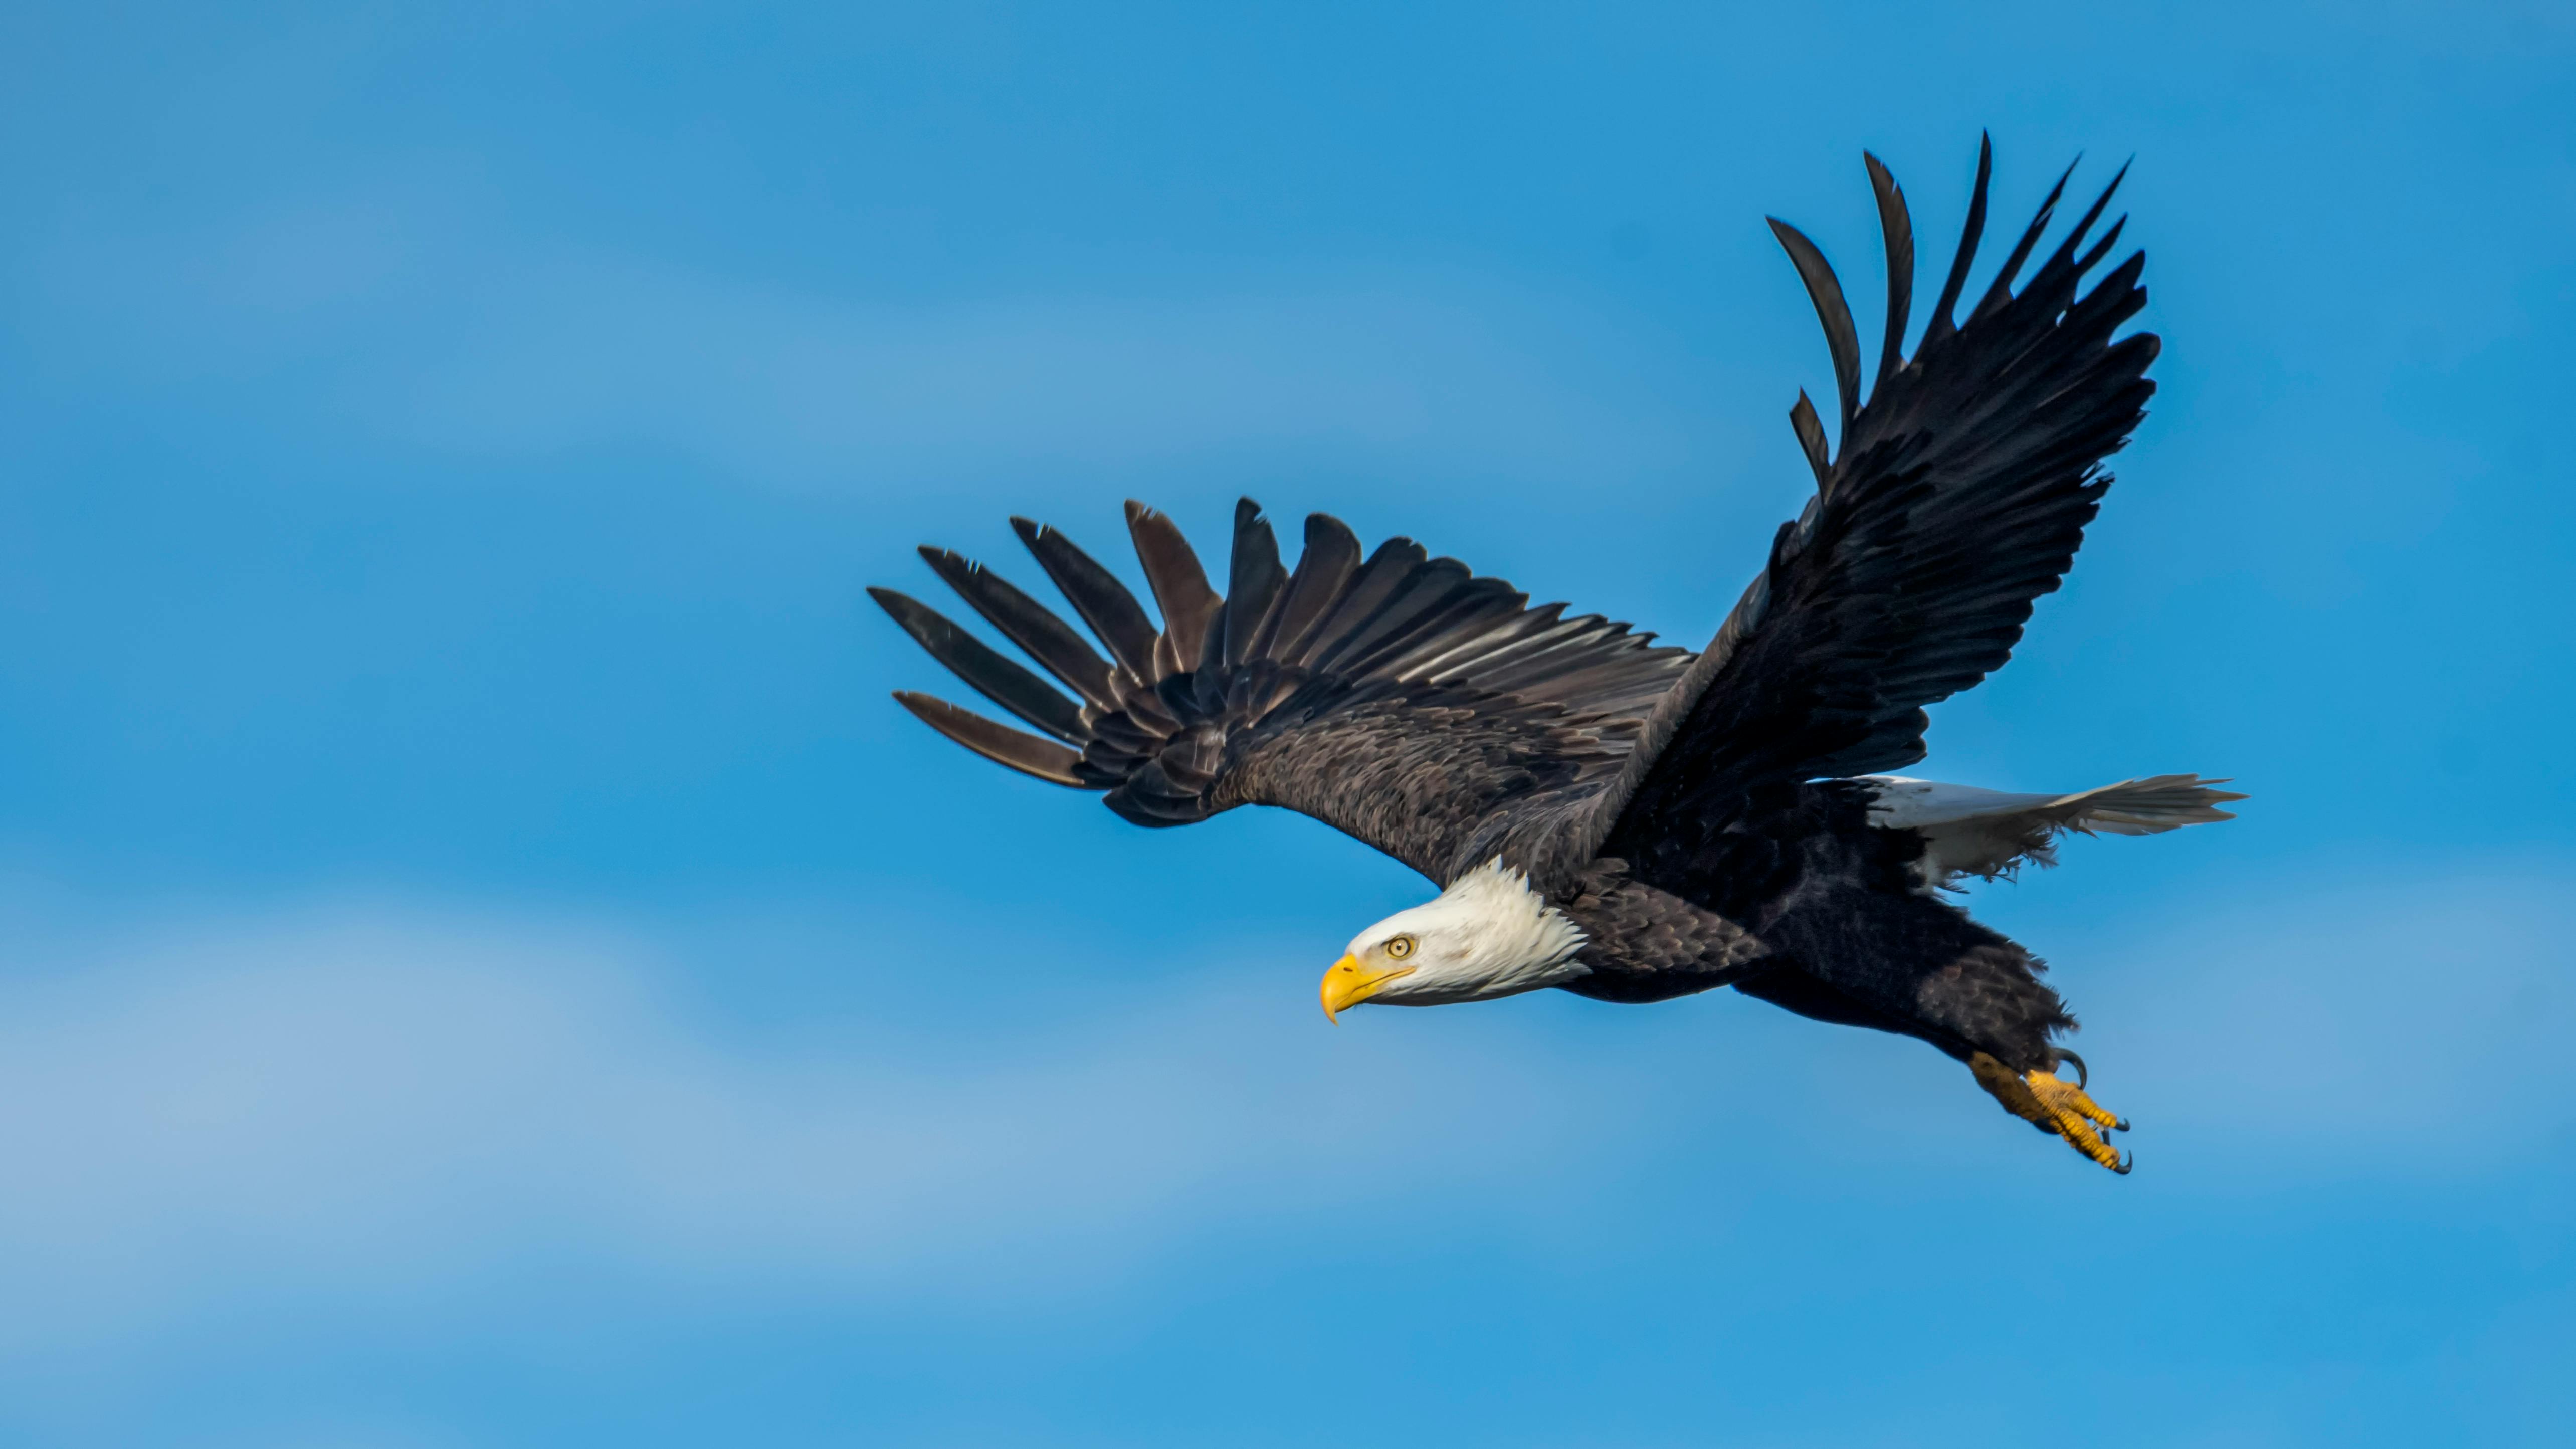 Download Stunning HD Eagle Images - Over 4,000 Free Photos Available -  Pixabay